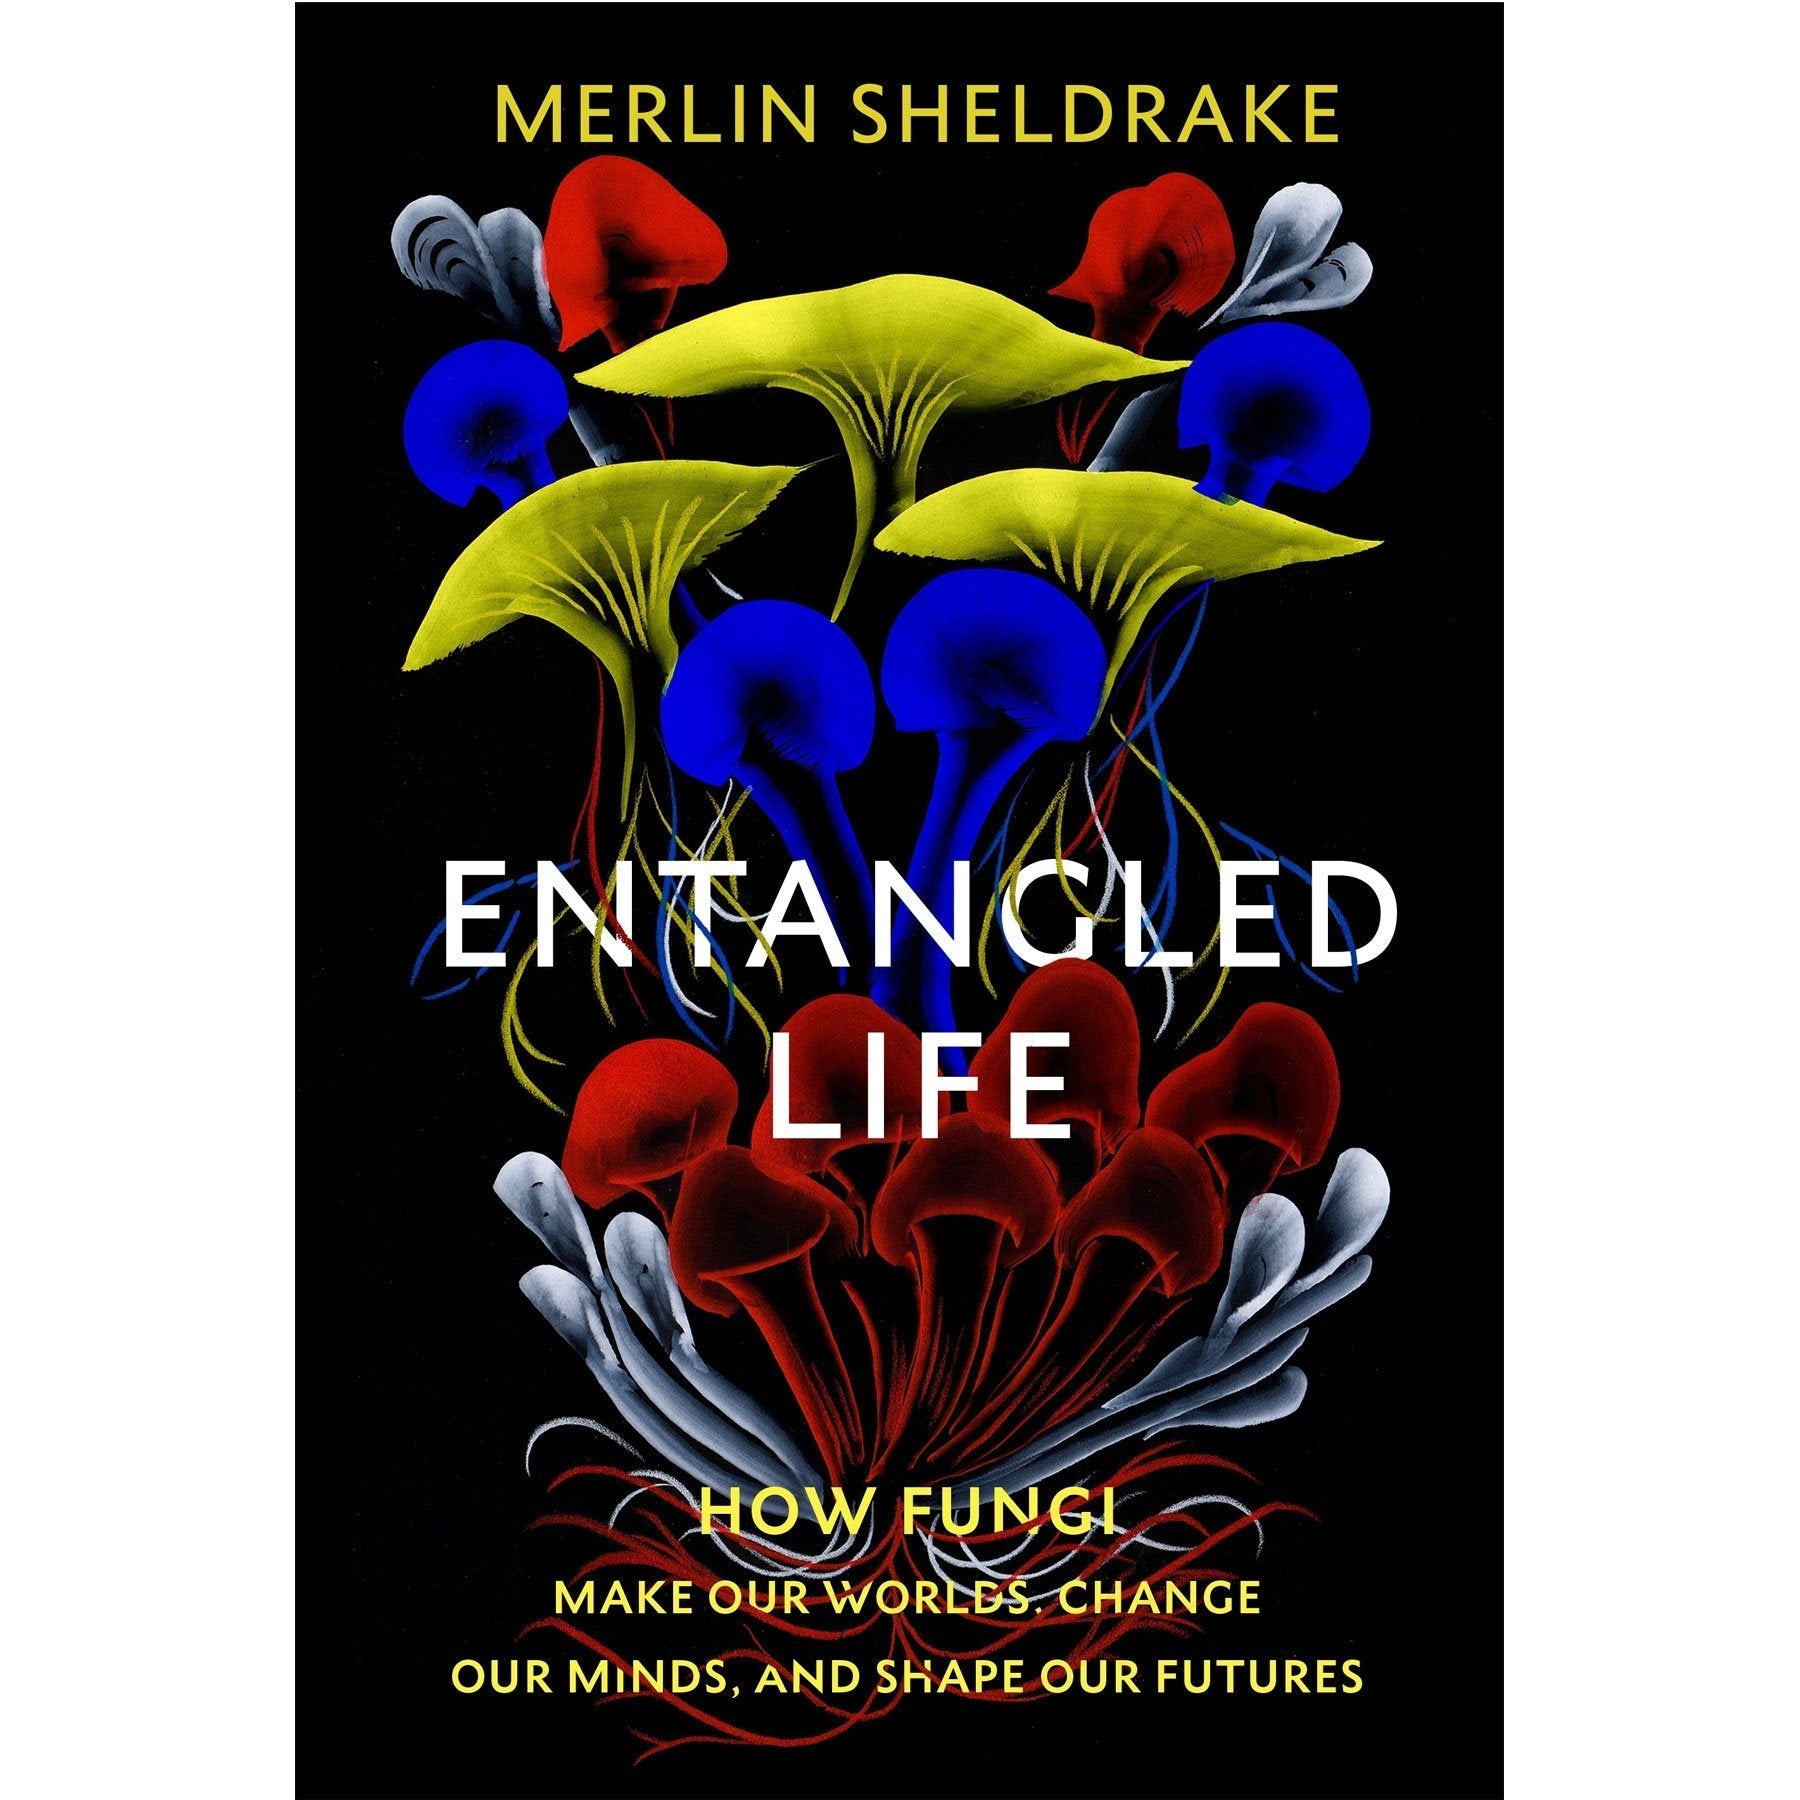 Entangled Life : How Fungi Make Our Worlds, Change Our Minds and Shape Our Futures (Smaller Format) - Happy Valley Merlin Sheldrake Book